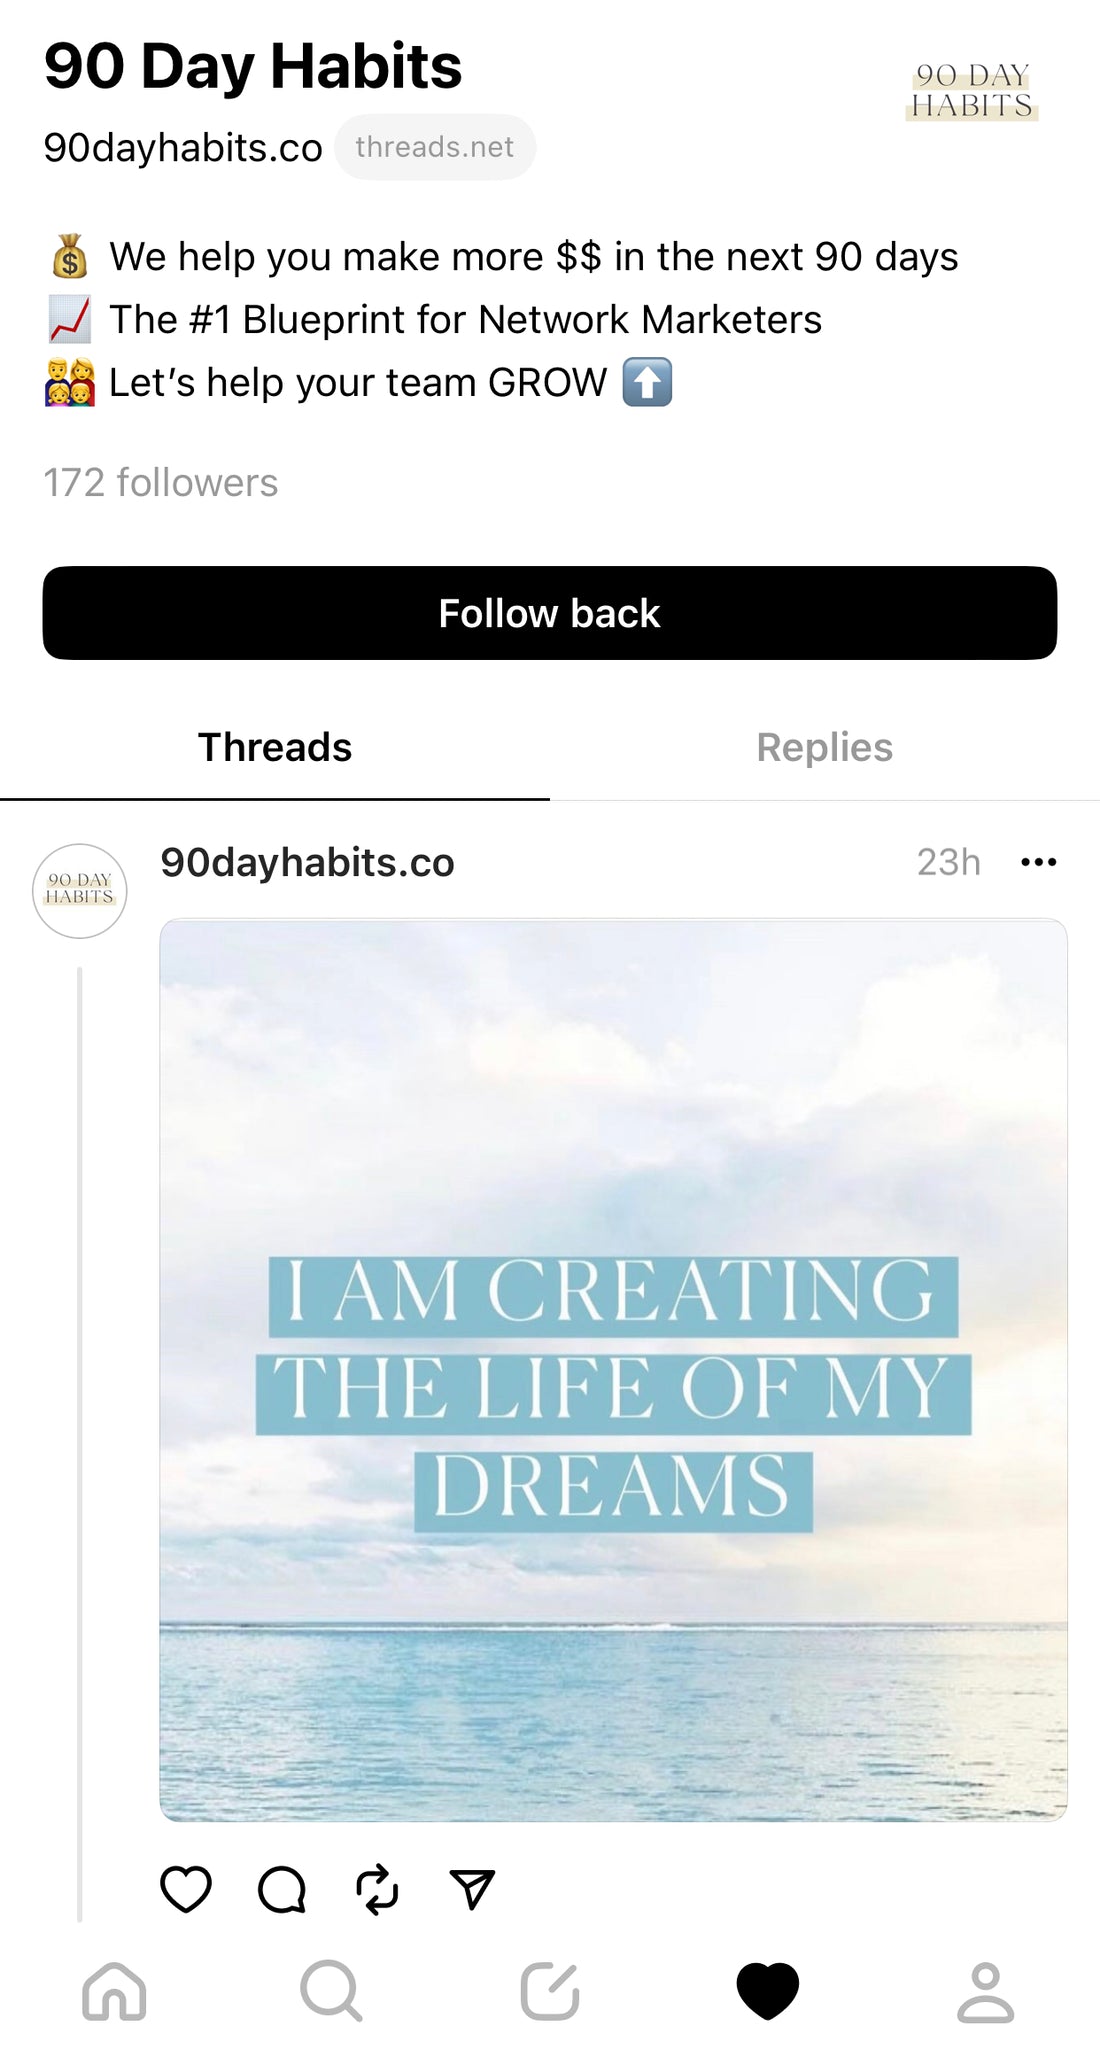 Exploring Threads: Twitter's Casual and Engaging Sister App